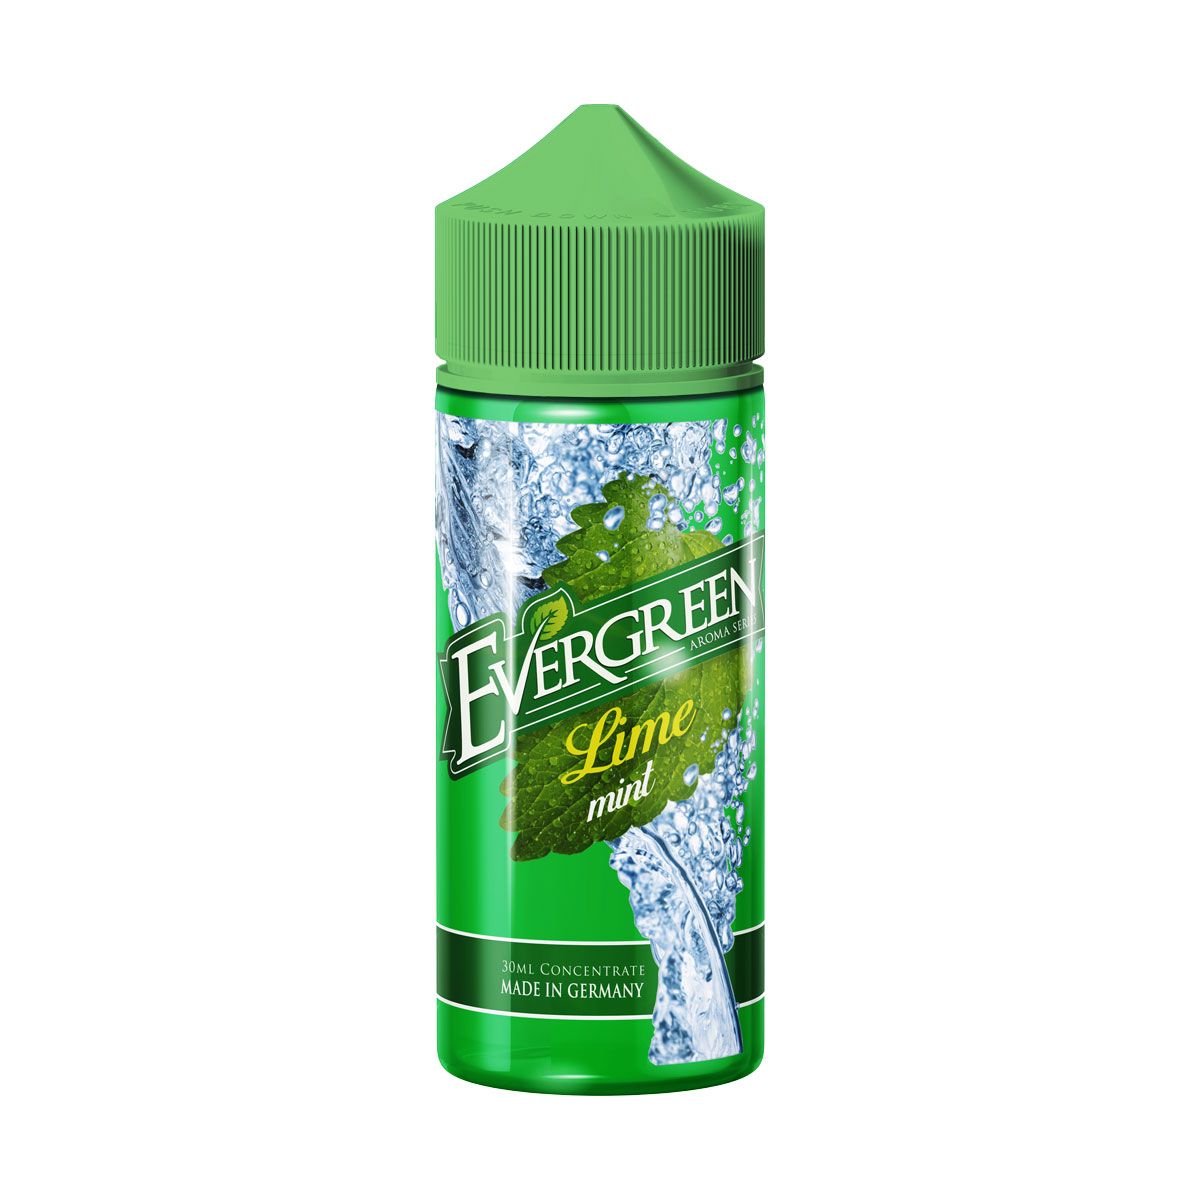 EVERGREEN Lime Mint Aroma by SIQUE BERLIN 7ml Longfill